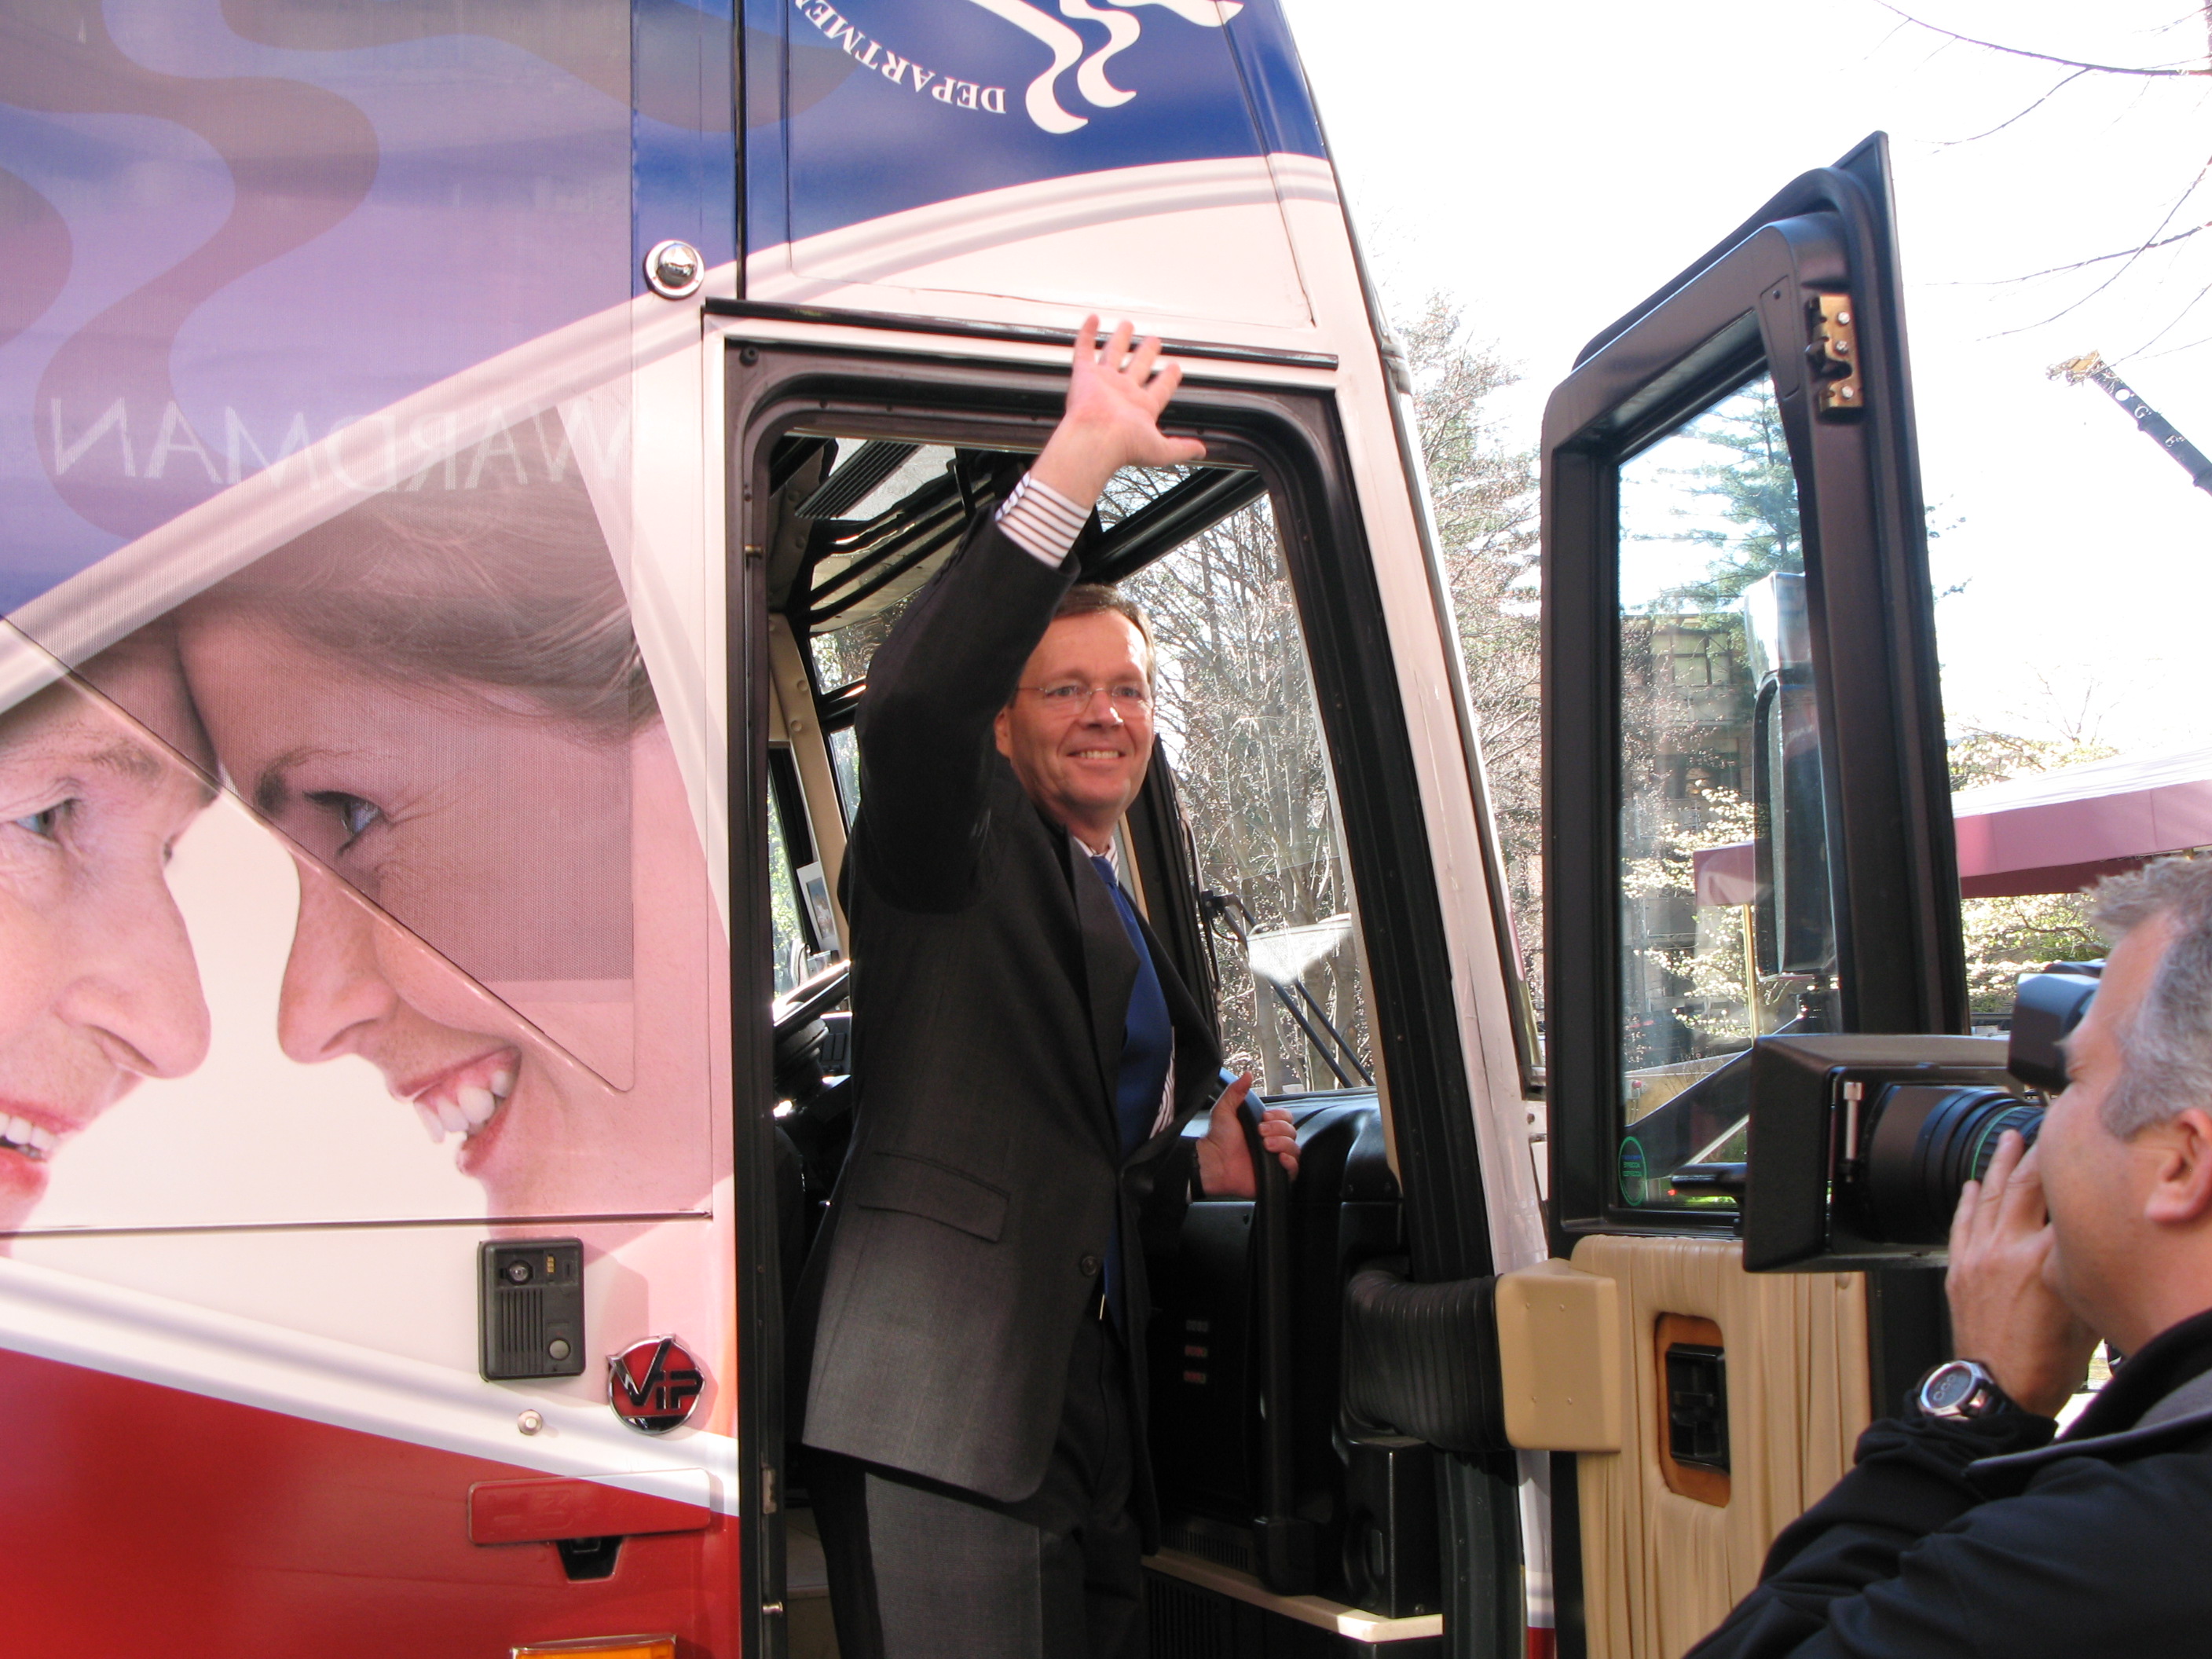 Photo - The Department's "A HealthierUS Starts Here" bus tour launch